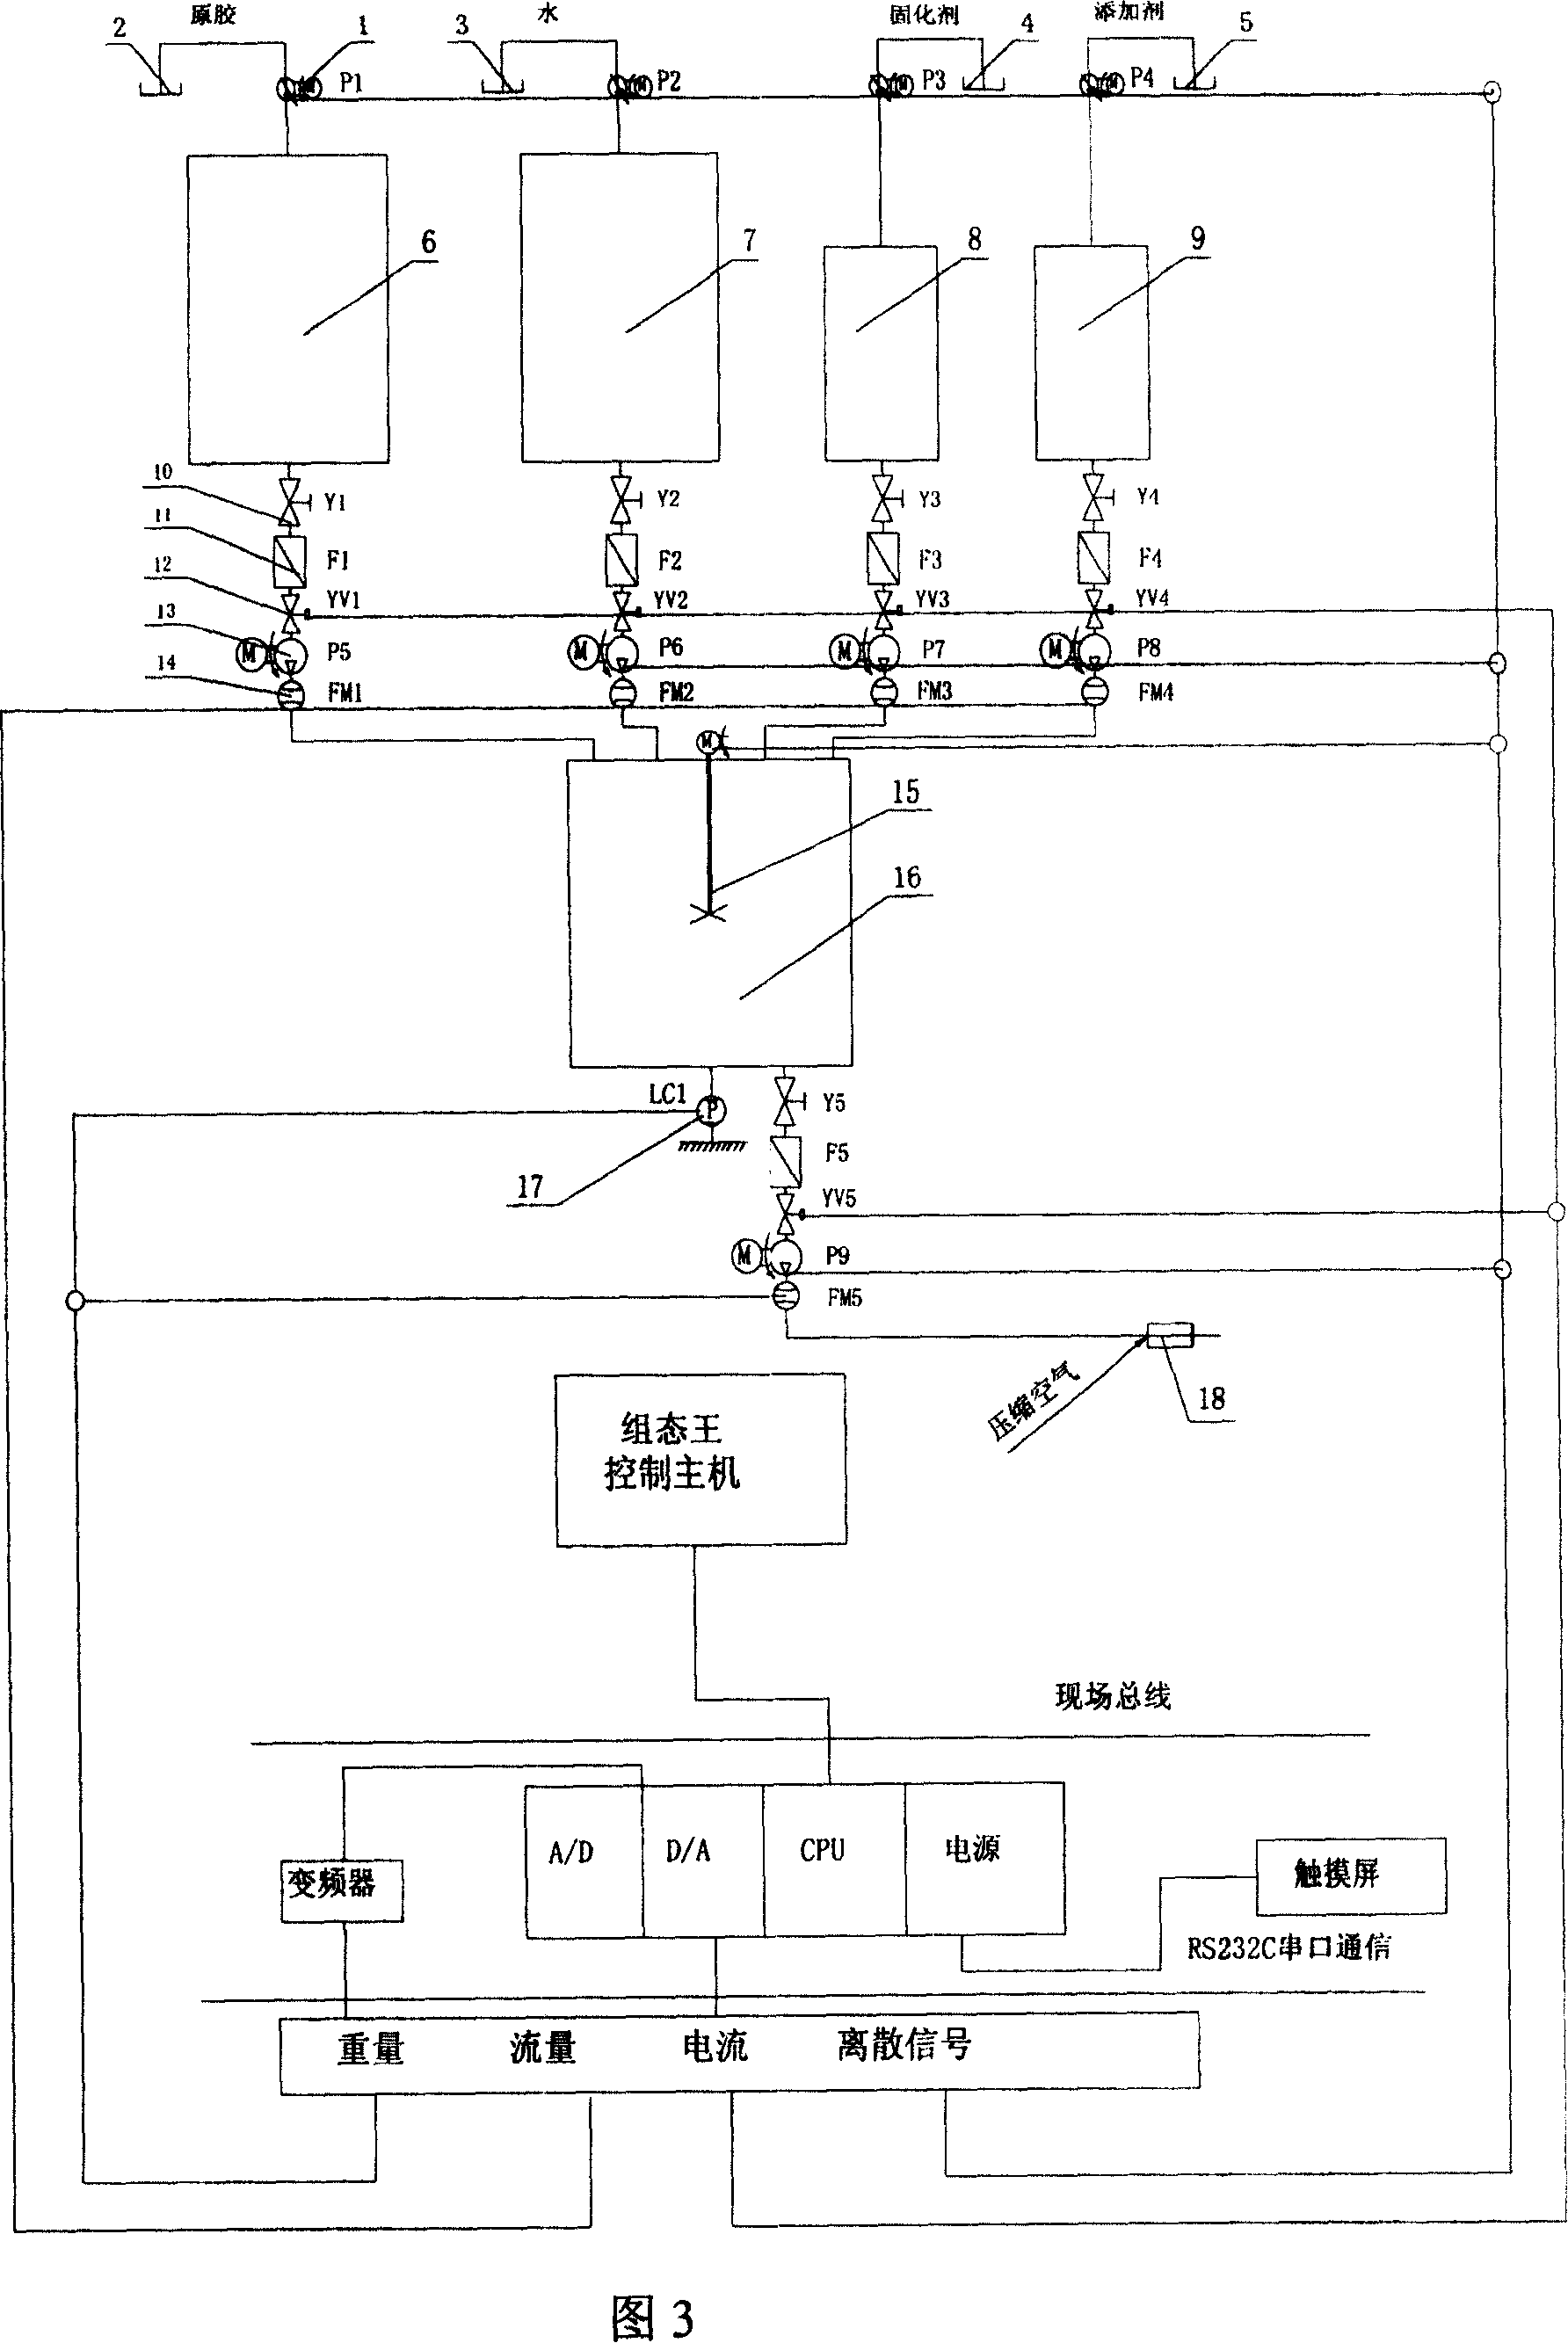 Parallel on-line fuzzy adaptive glue compounding and applying control method and system for man-made board